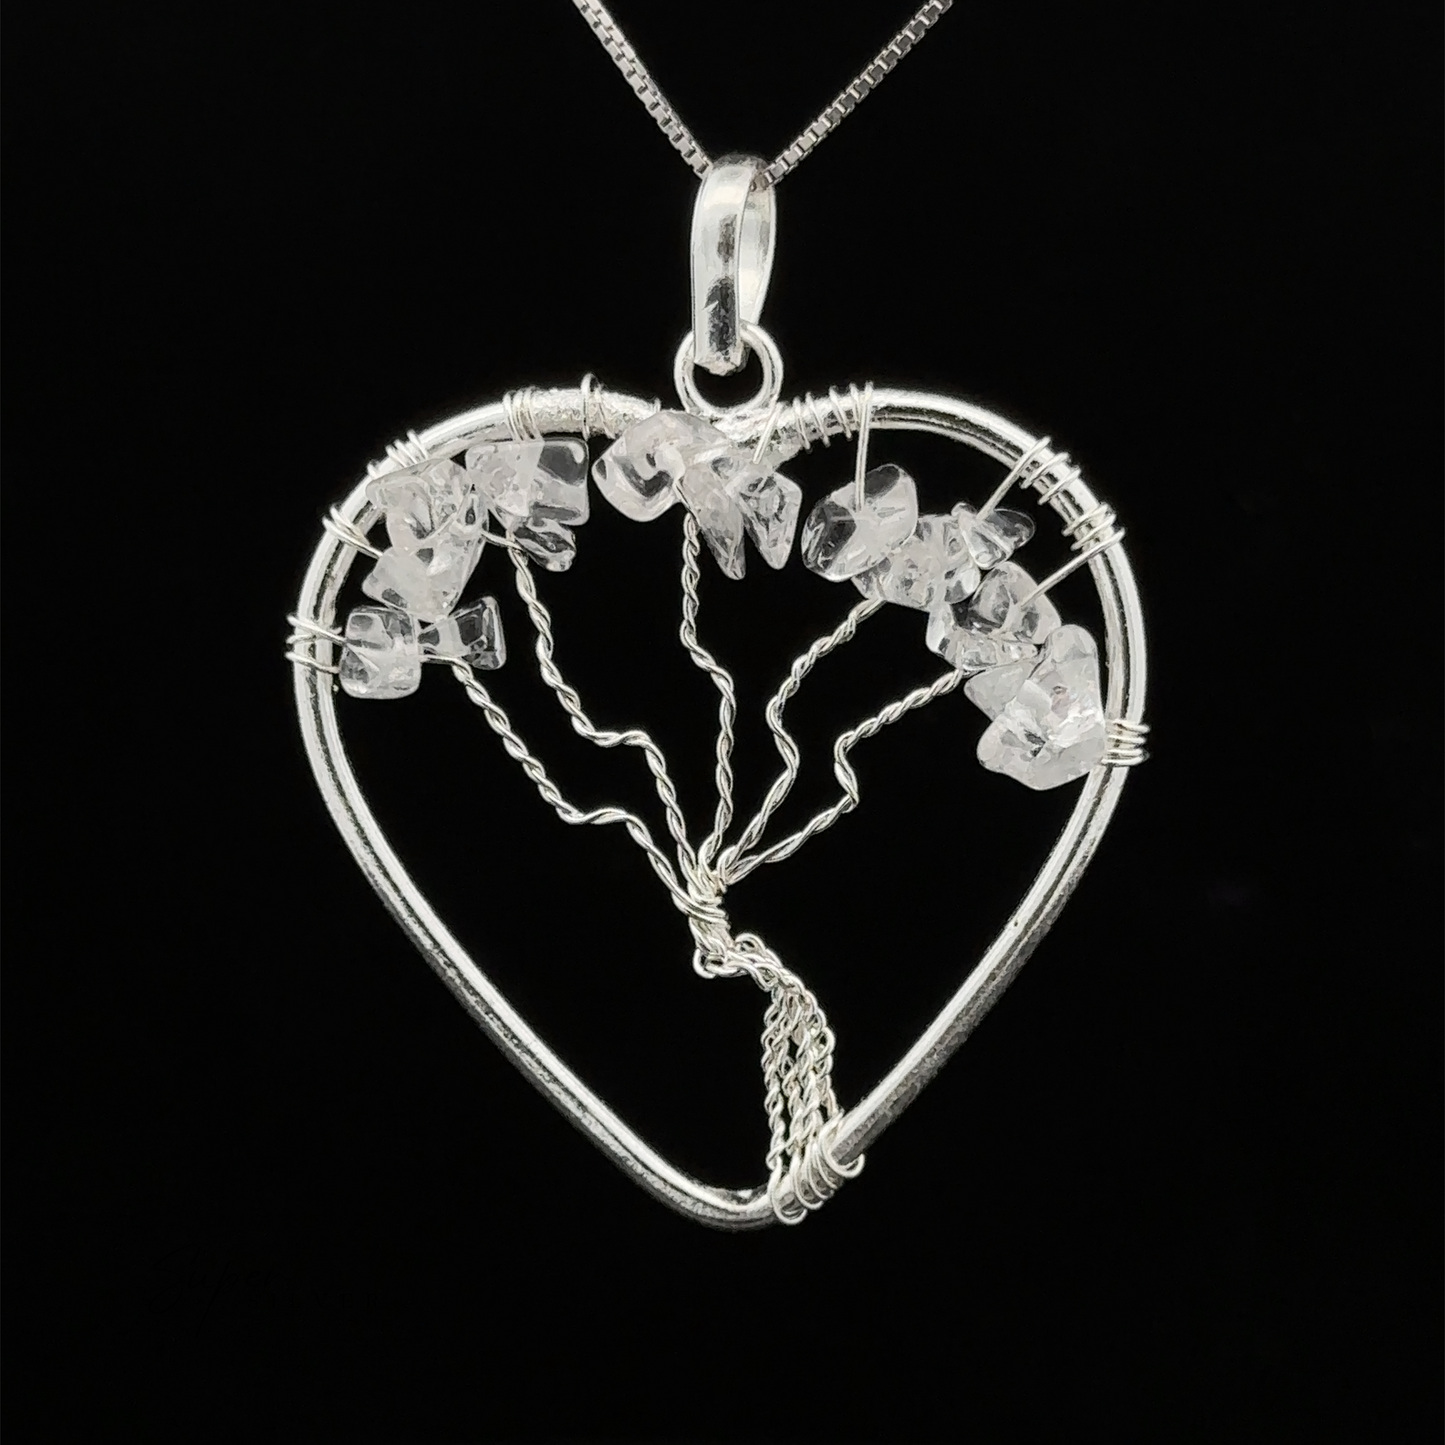 
                  
                    A Heart Shaped Tree of Life Pendant features a wire-wrapped tree design, adorned with small white stones and raw stone beads, all set against a black background.
                  
                